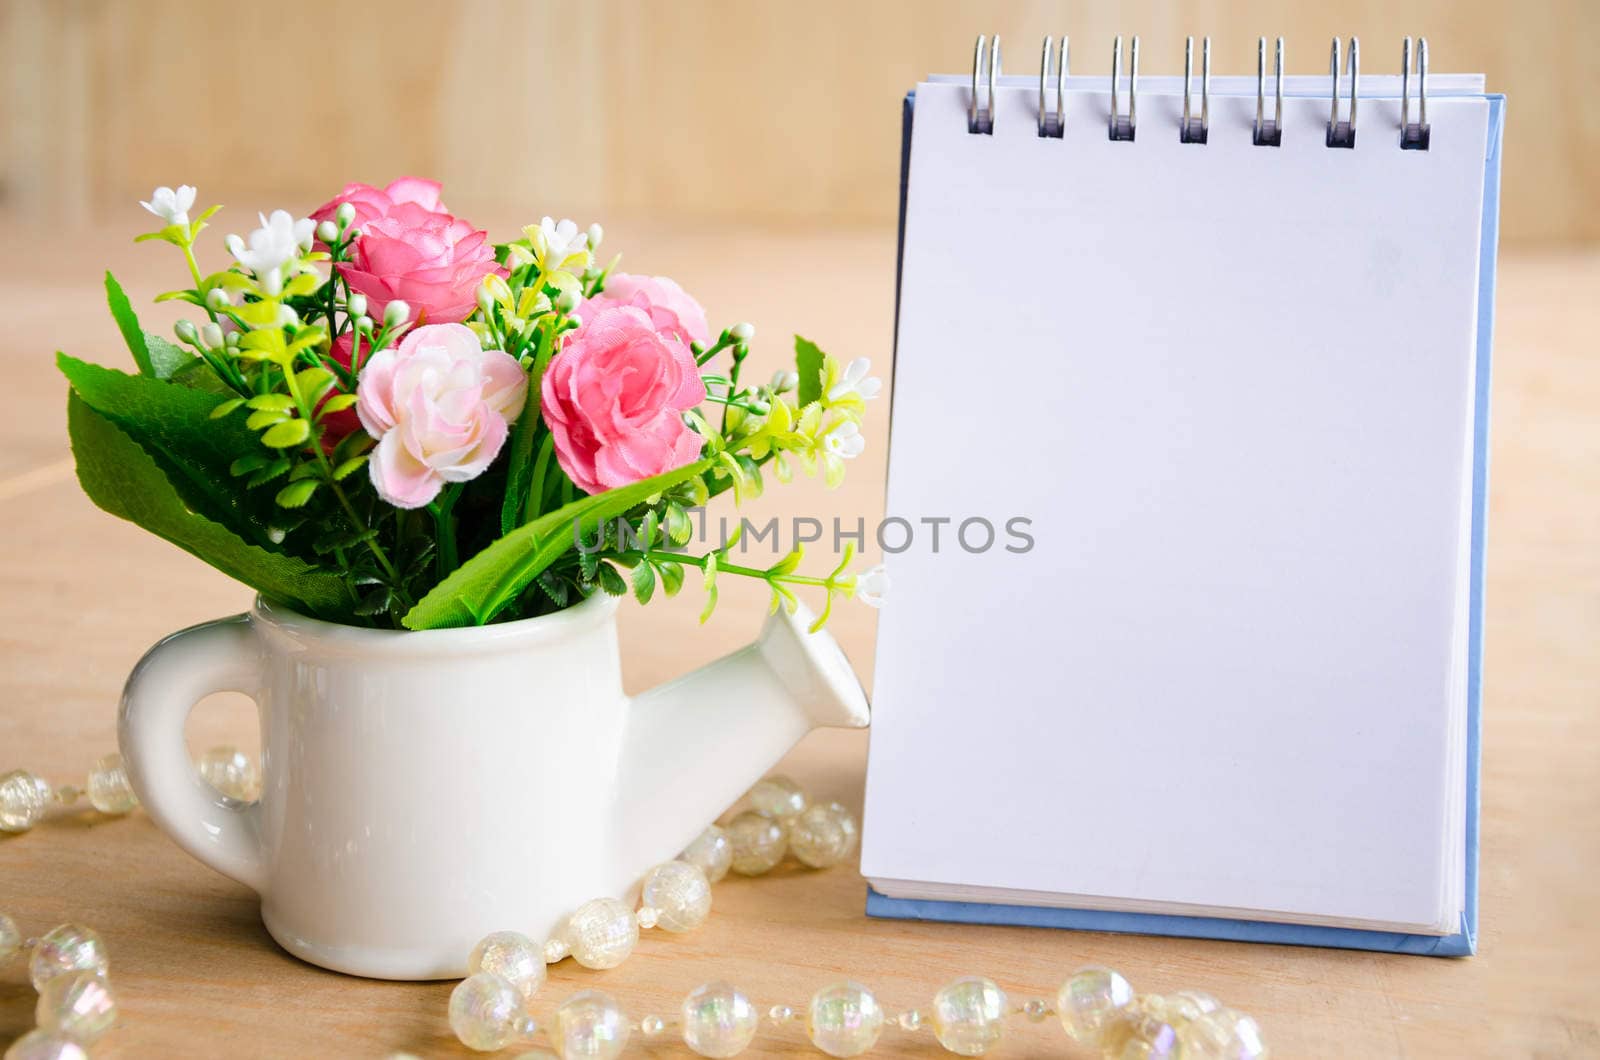 focus at flower with blank diary binder on wooden background.